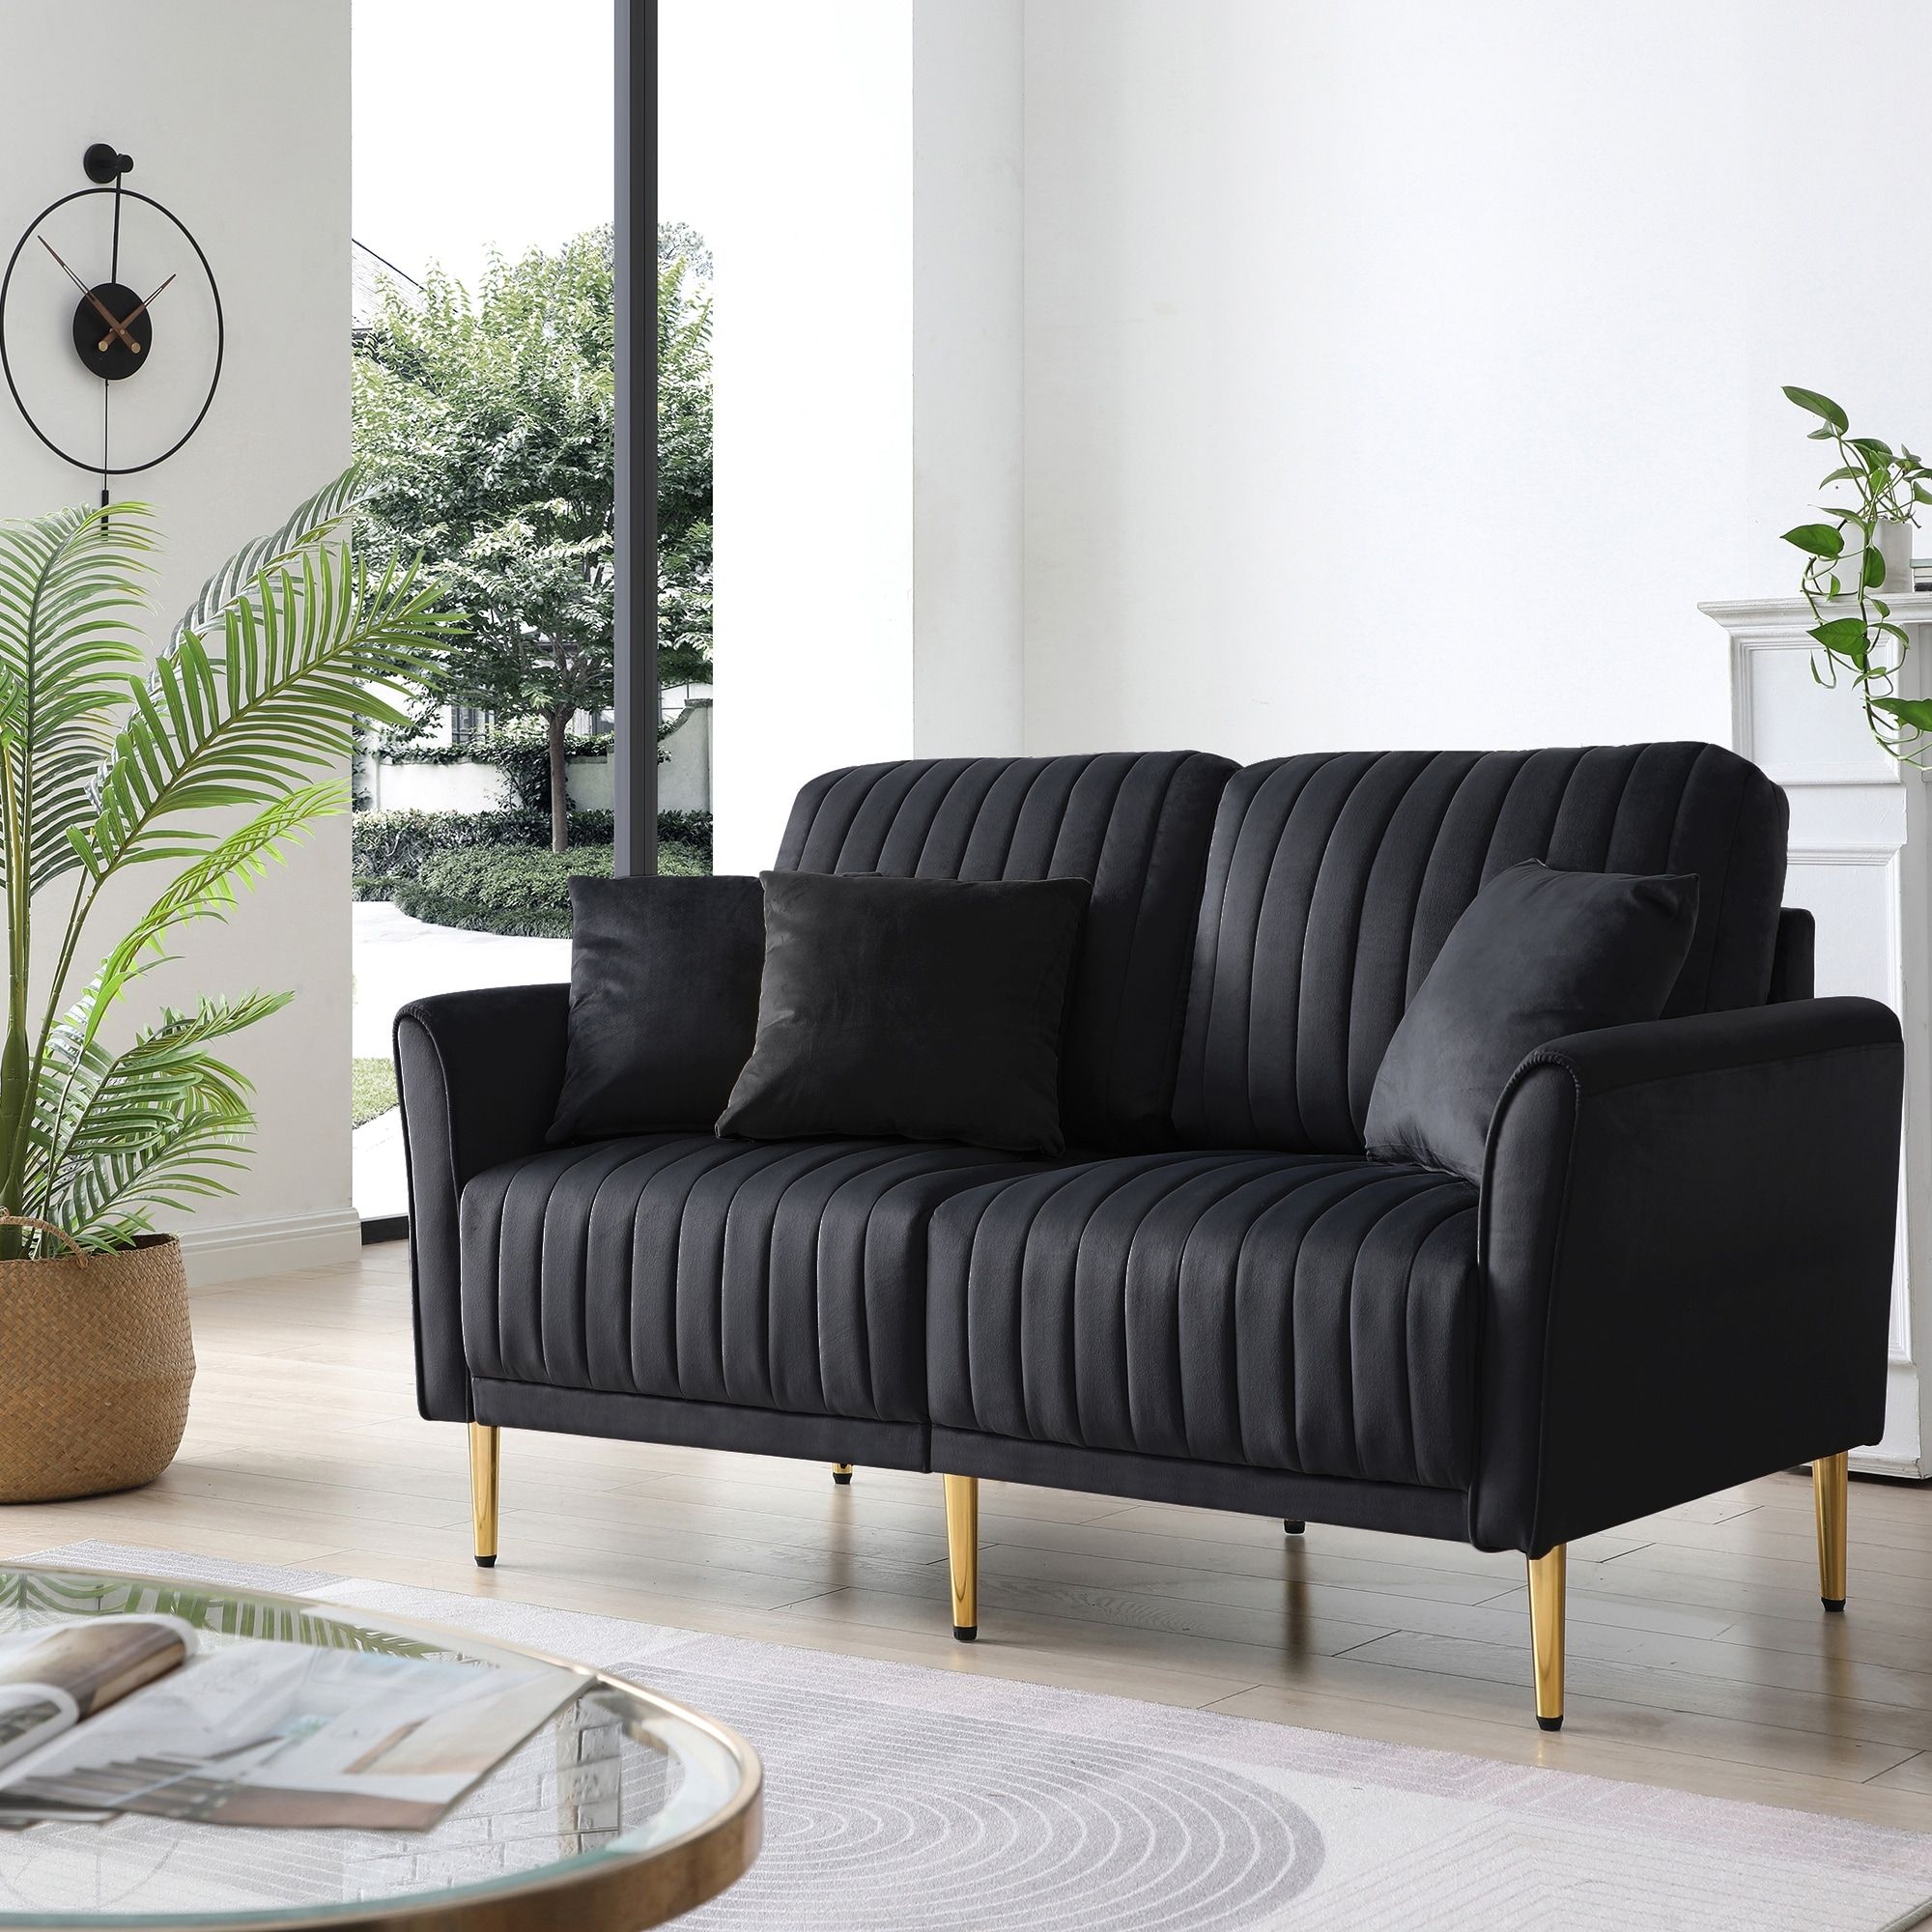 Velvet Upholstered Loveseat Sofa, Tufted Back 2 Seater Sofa Couch – On Sale  – Bed Bath & Beyond – 38314515 With Regard To 2 Seater Black Velvet Sofa Beds (View 2 of 15)